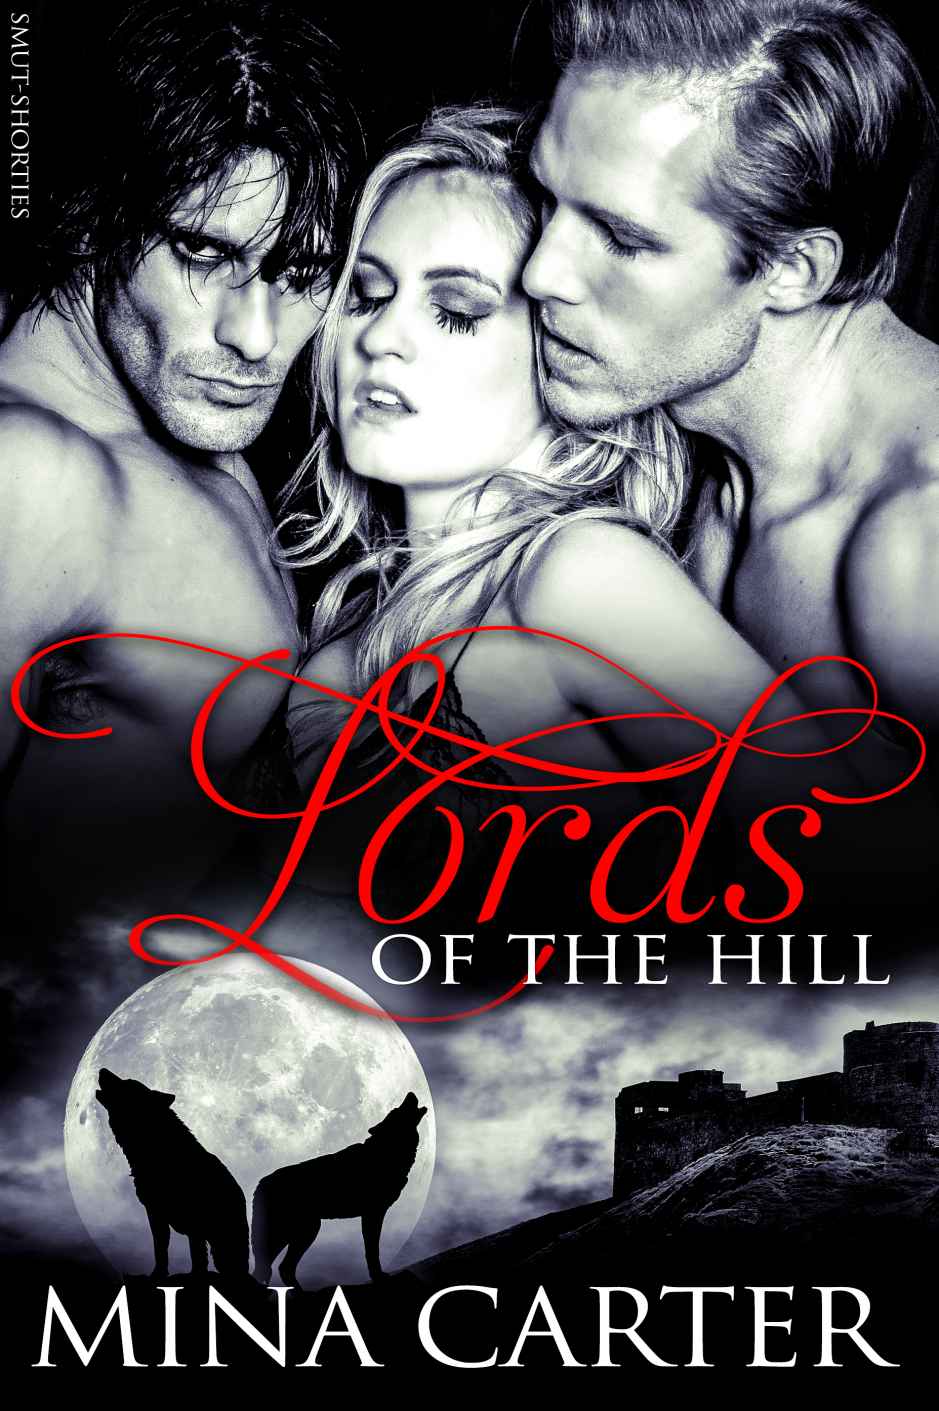 Lords of the Hill: BBW Werewolf Erotica (Smut-Shorties Book 3) by Mina Carter